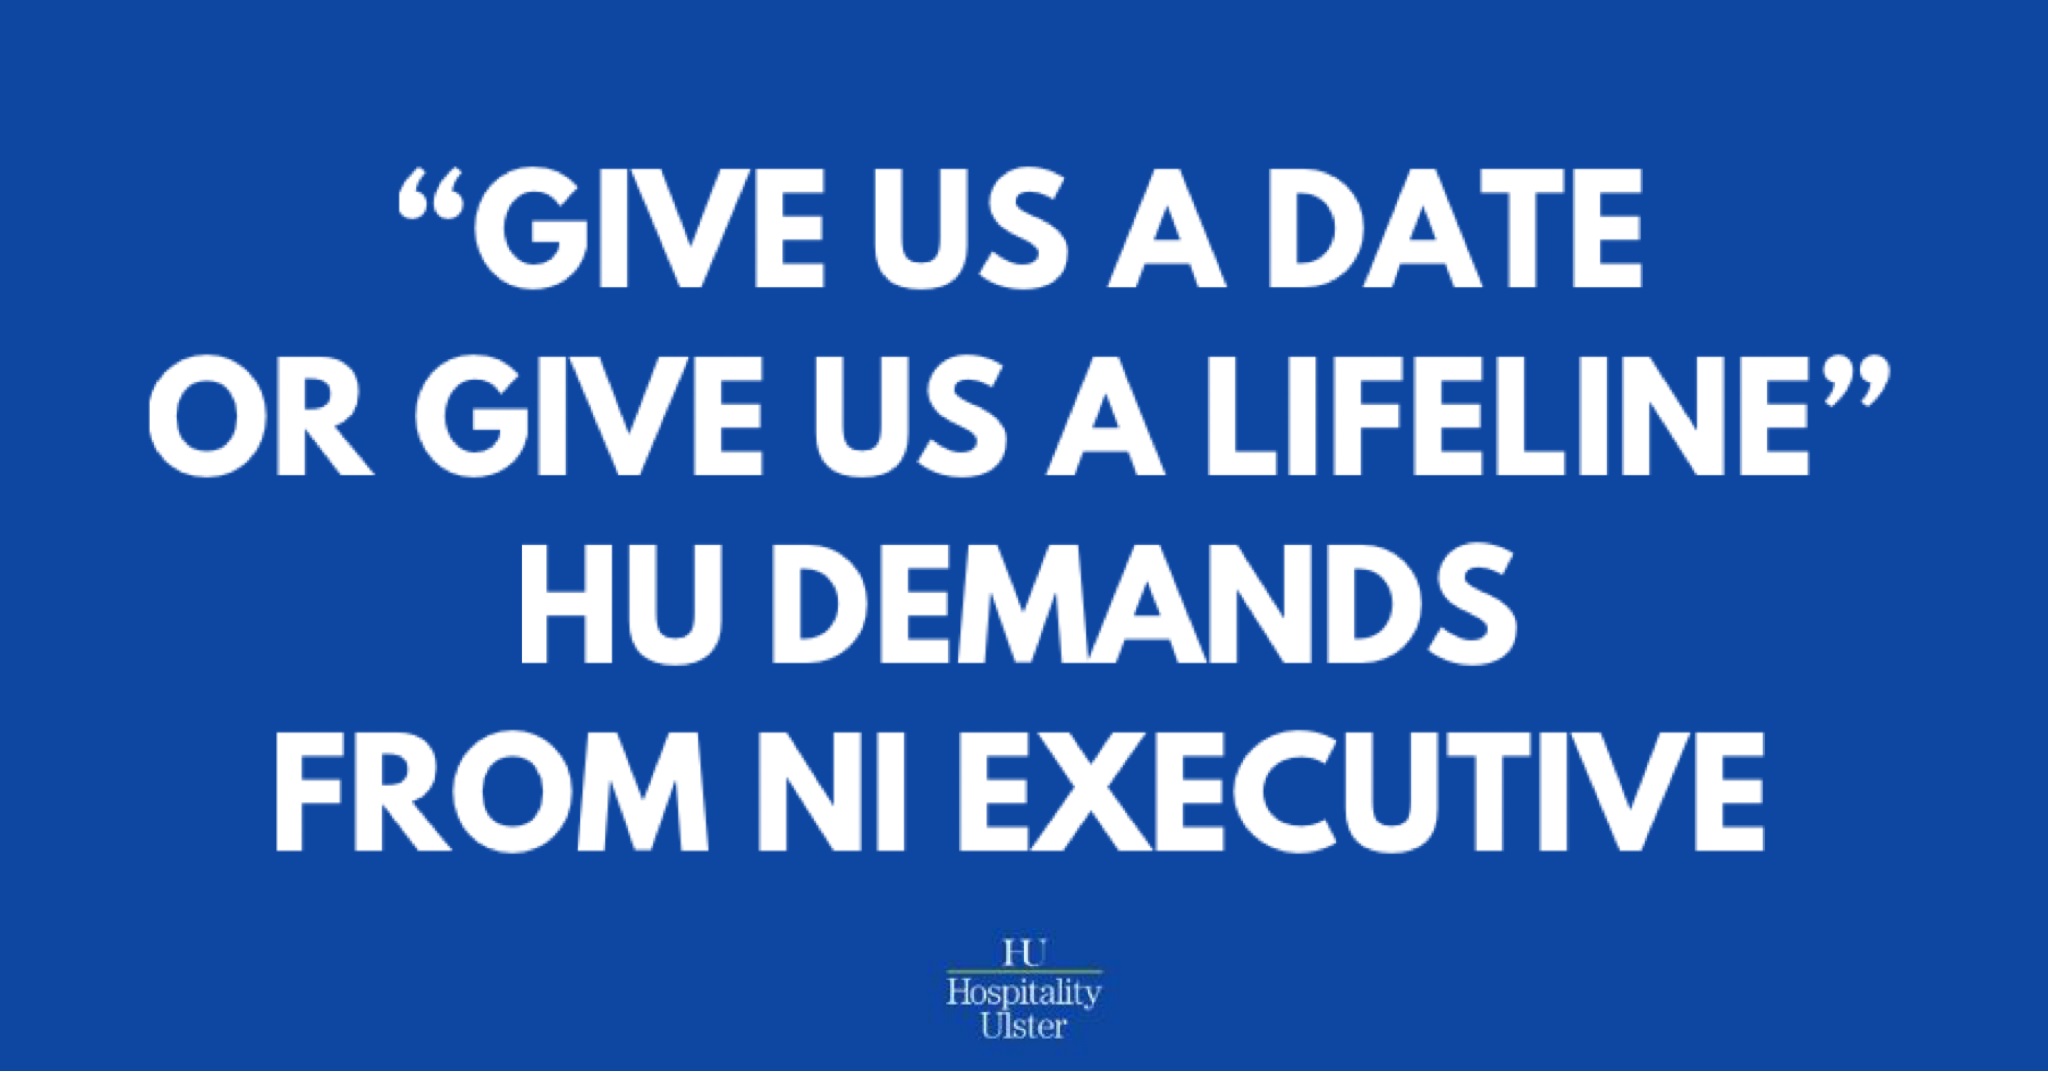 GIVE US A DATE OR GIVE US A LIFELINE - HU DEMANDS FROM NI EXECUTIVE